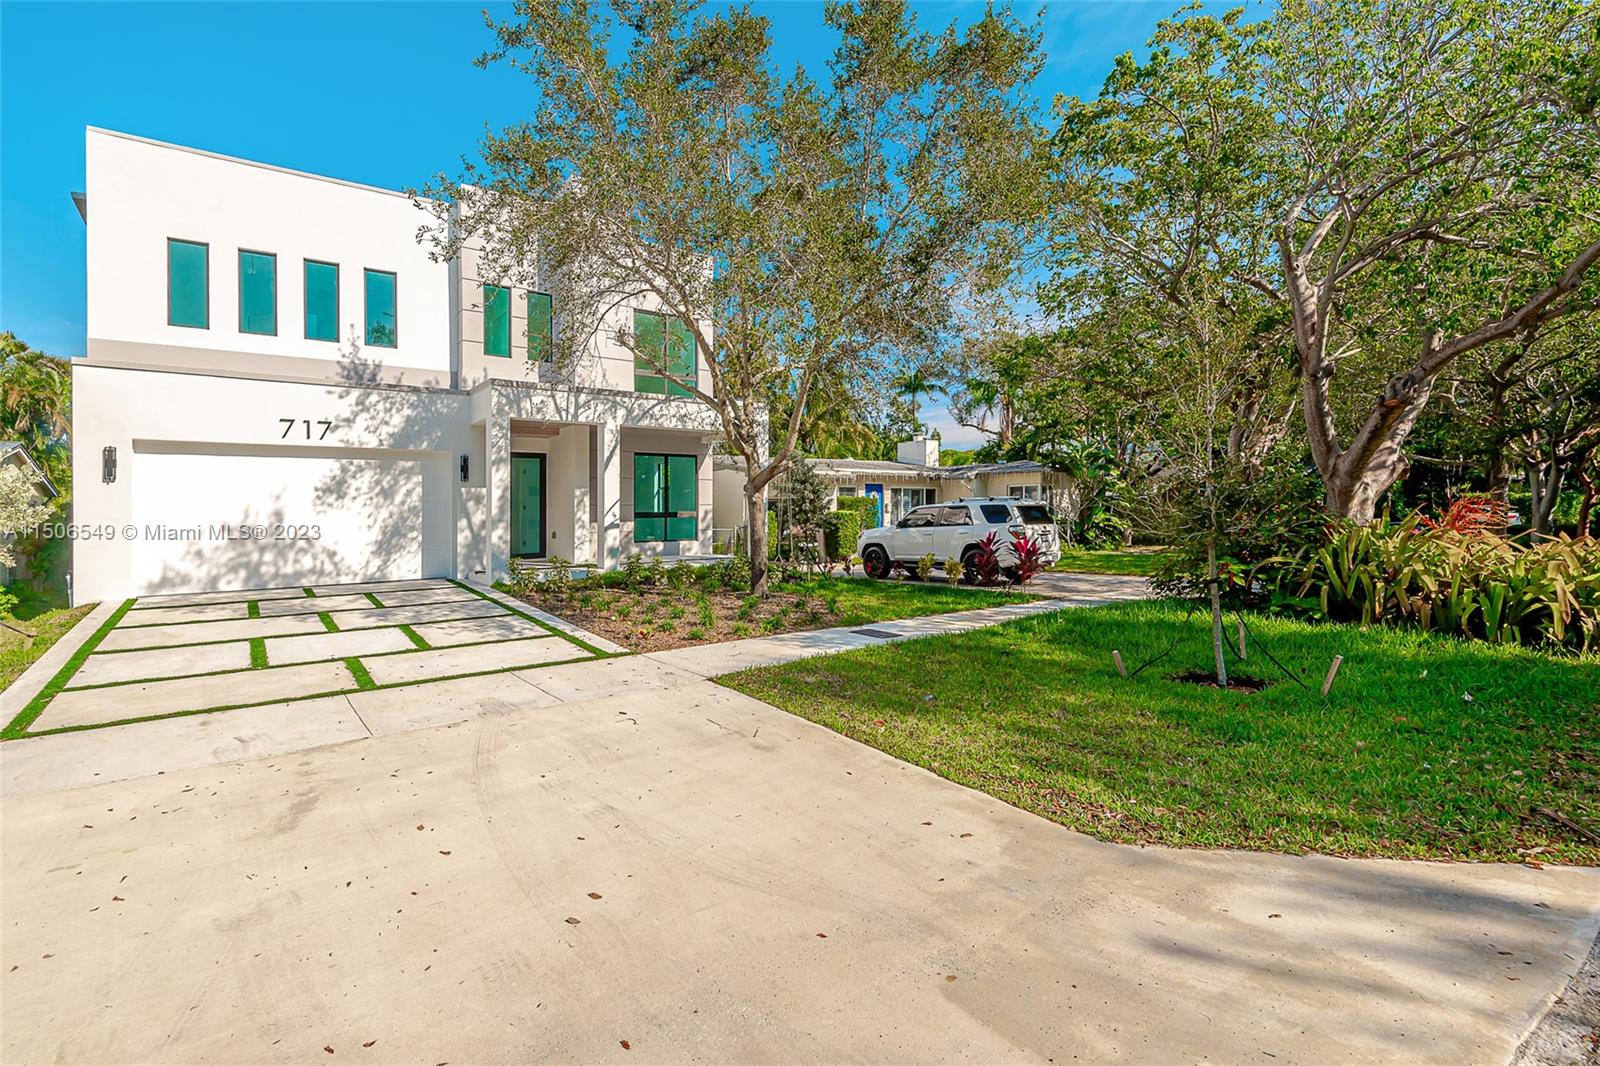 Property for Sale at 717 Se 8th St, Fort Lauderdale, Broward County, Florida - Bedrooms: 4 
Bathrooms: 4  - $2,299,900